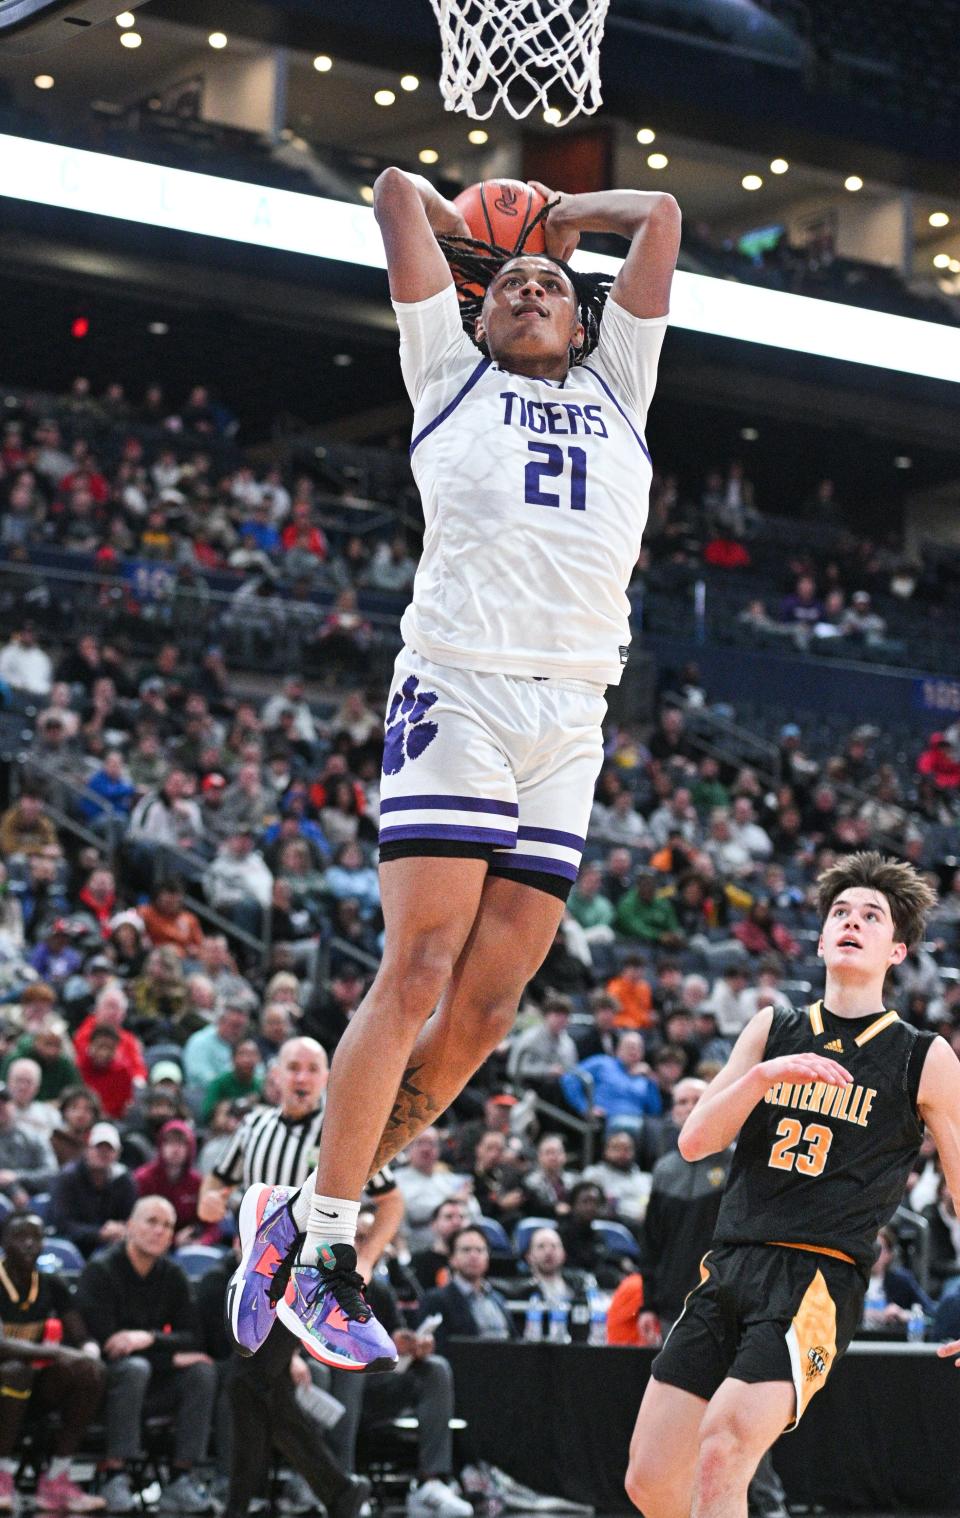 Pickerington Central's Devin Royal said he talks frequently with Ohio State coaches and that he's not concerned about the Buckeyes' struggles this season.